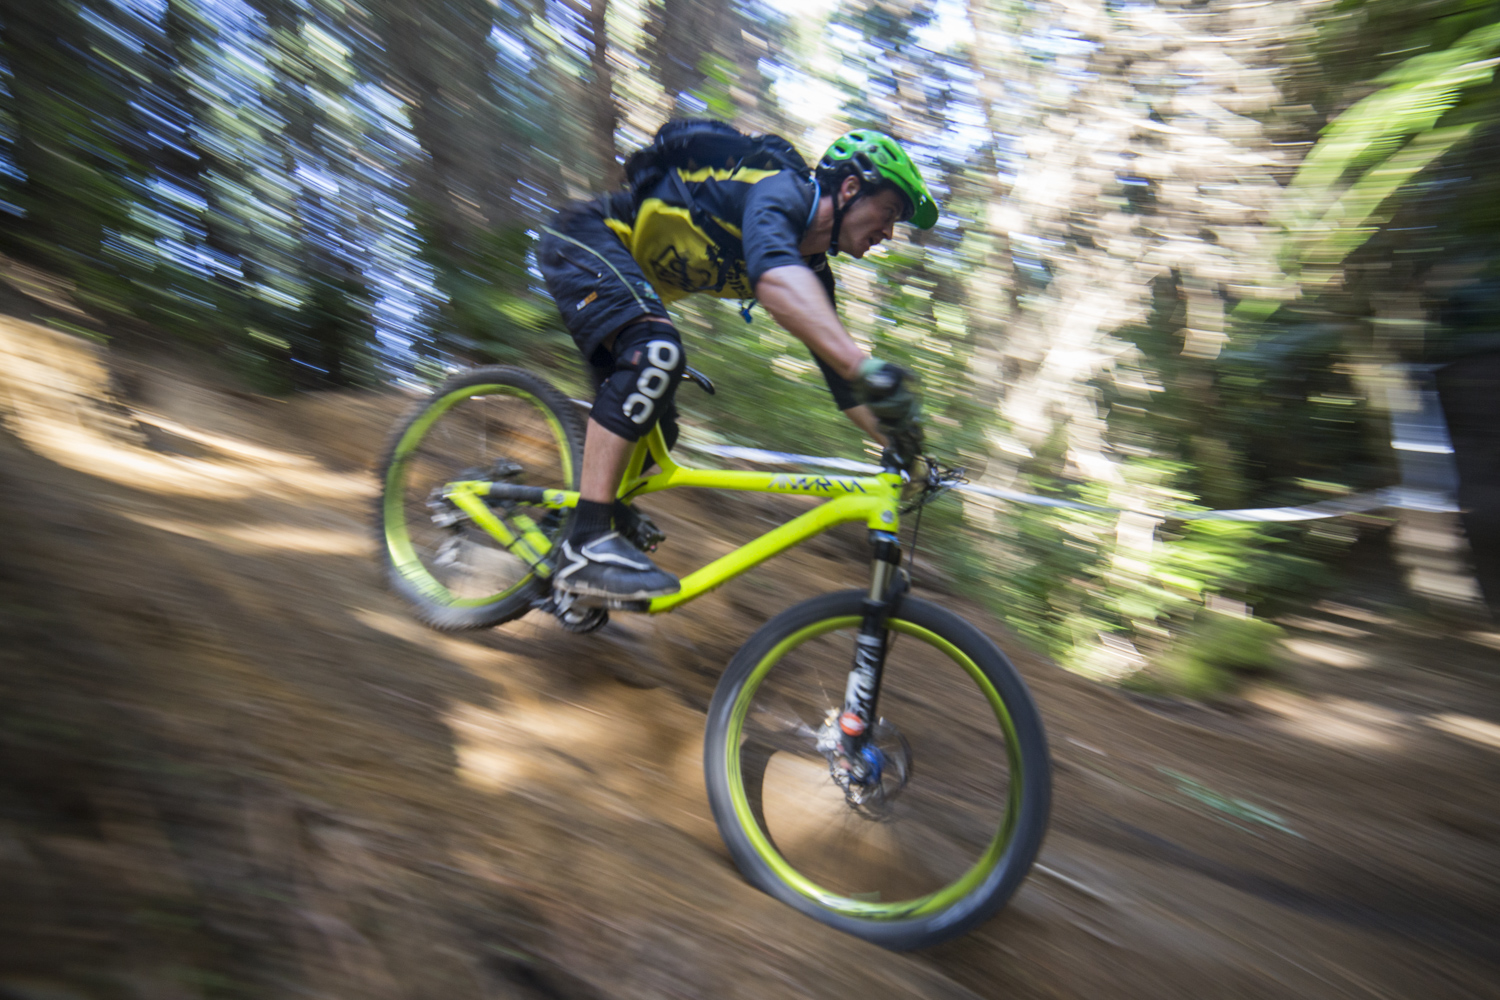 Rotorua Redwoods - Stage 3 - Rollercoaster.....Enduro racing and pan shots are so hot right now